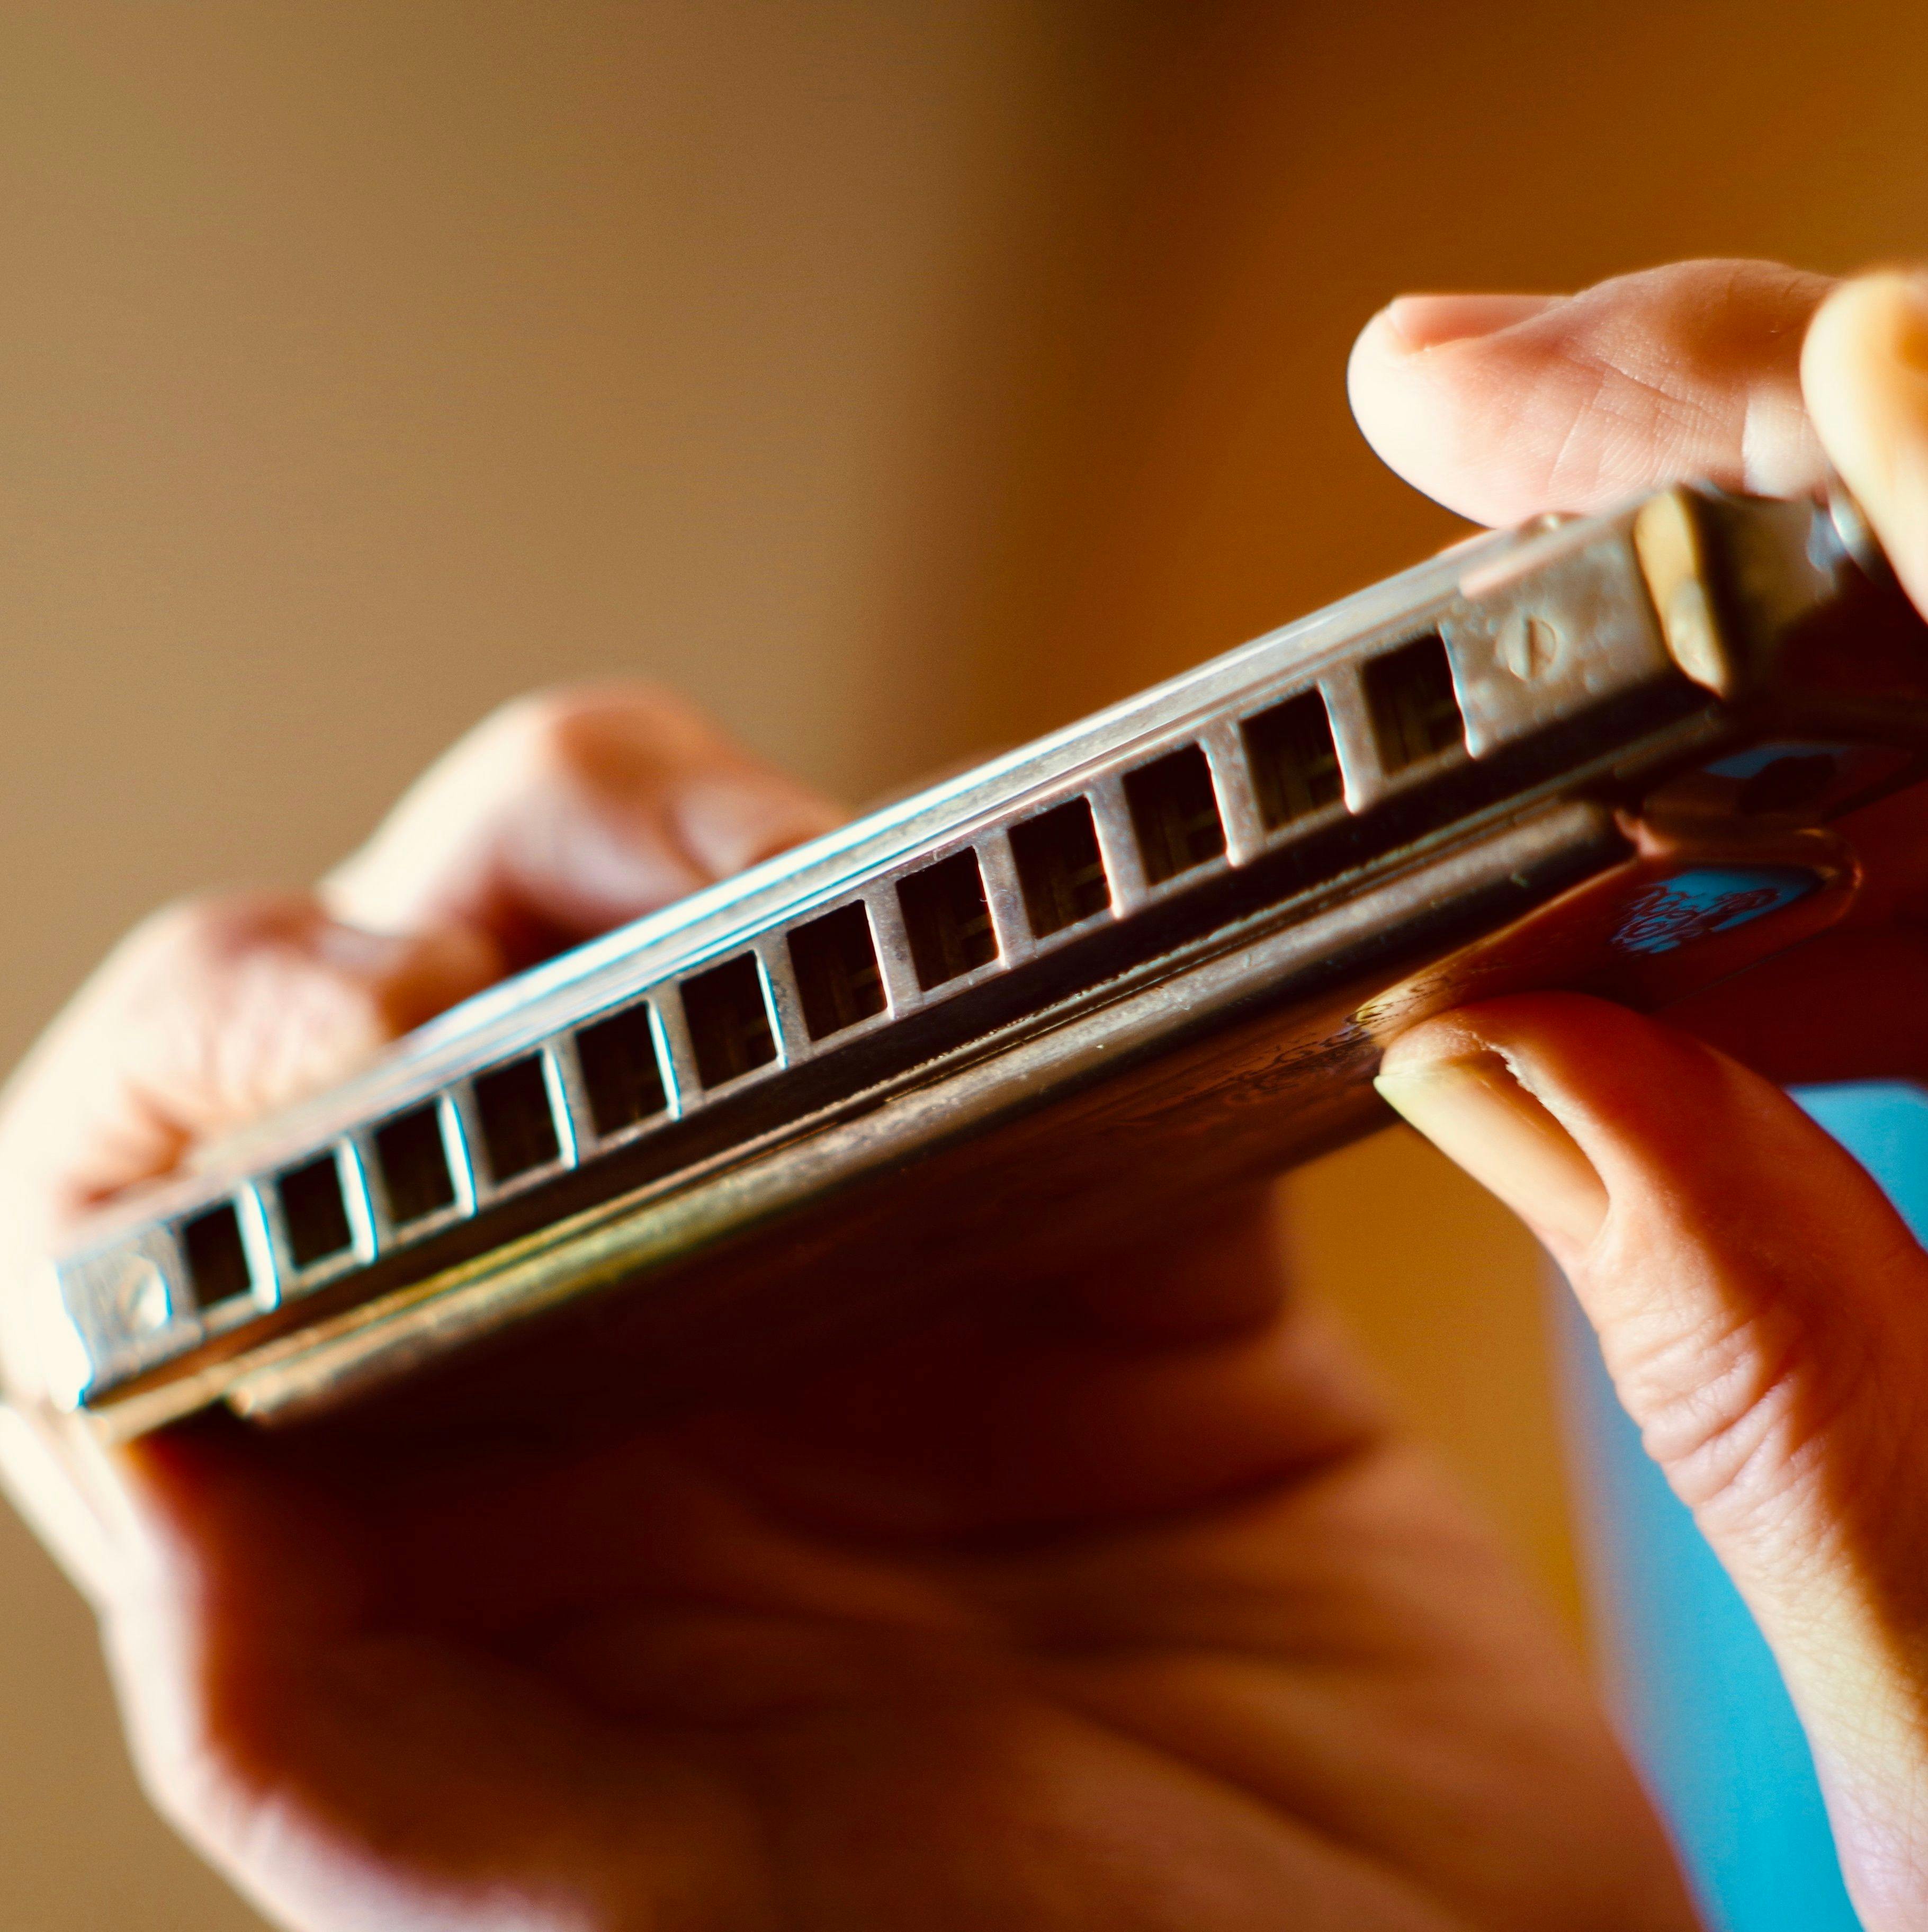 Providers Share Their Experience with Harmonica Therapy for COPD